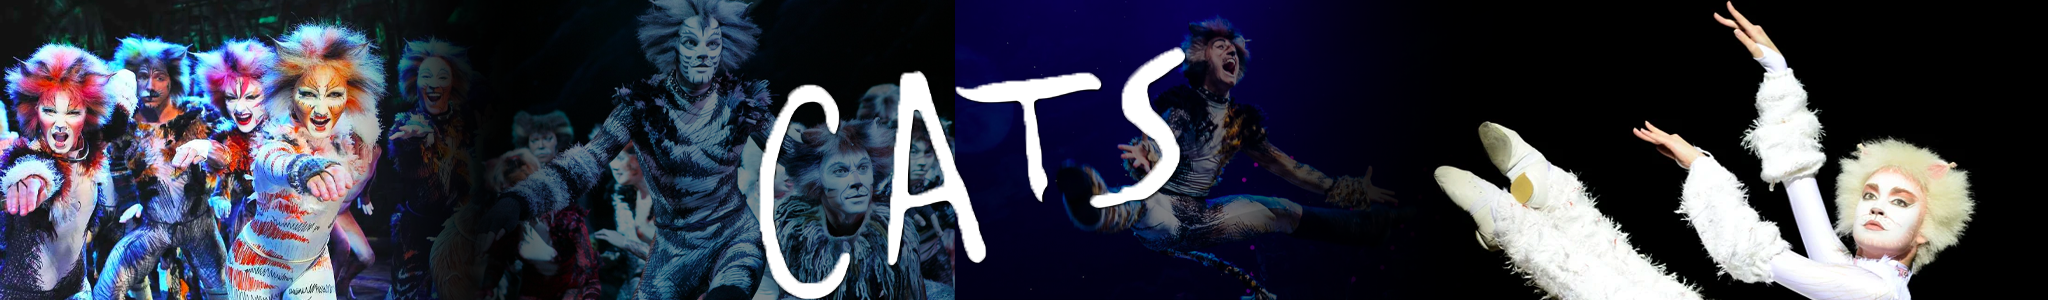 Cats Broadway Show